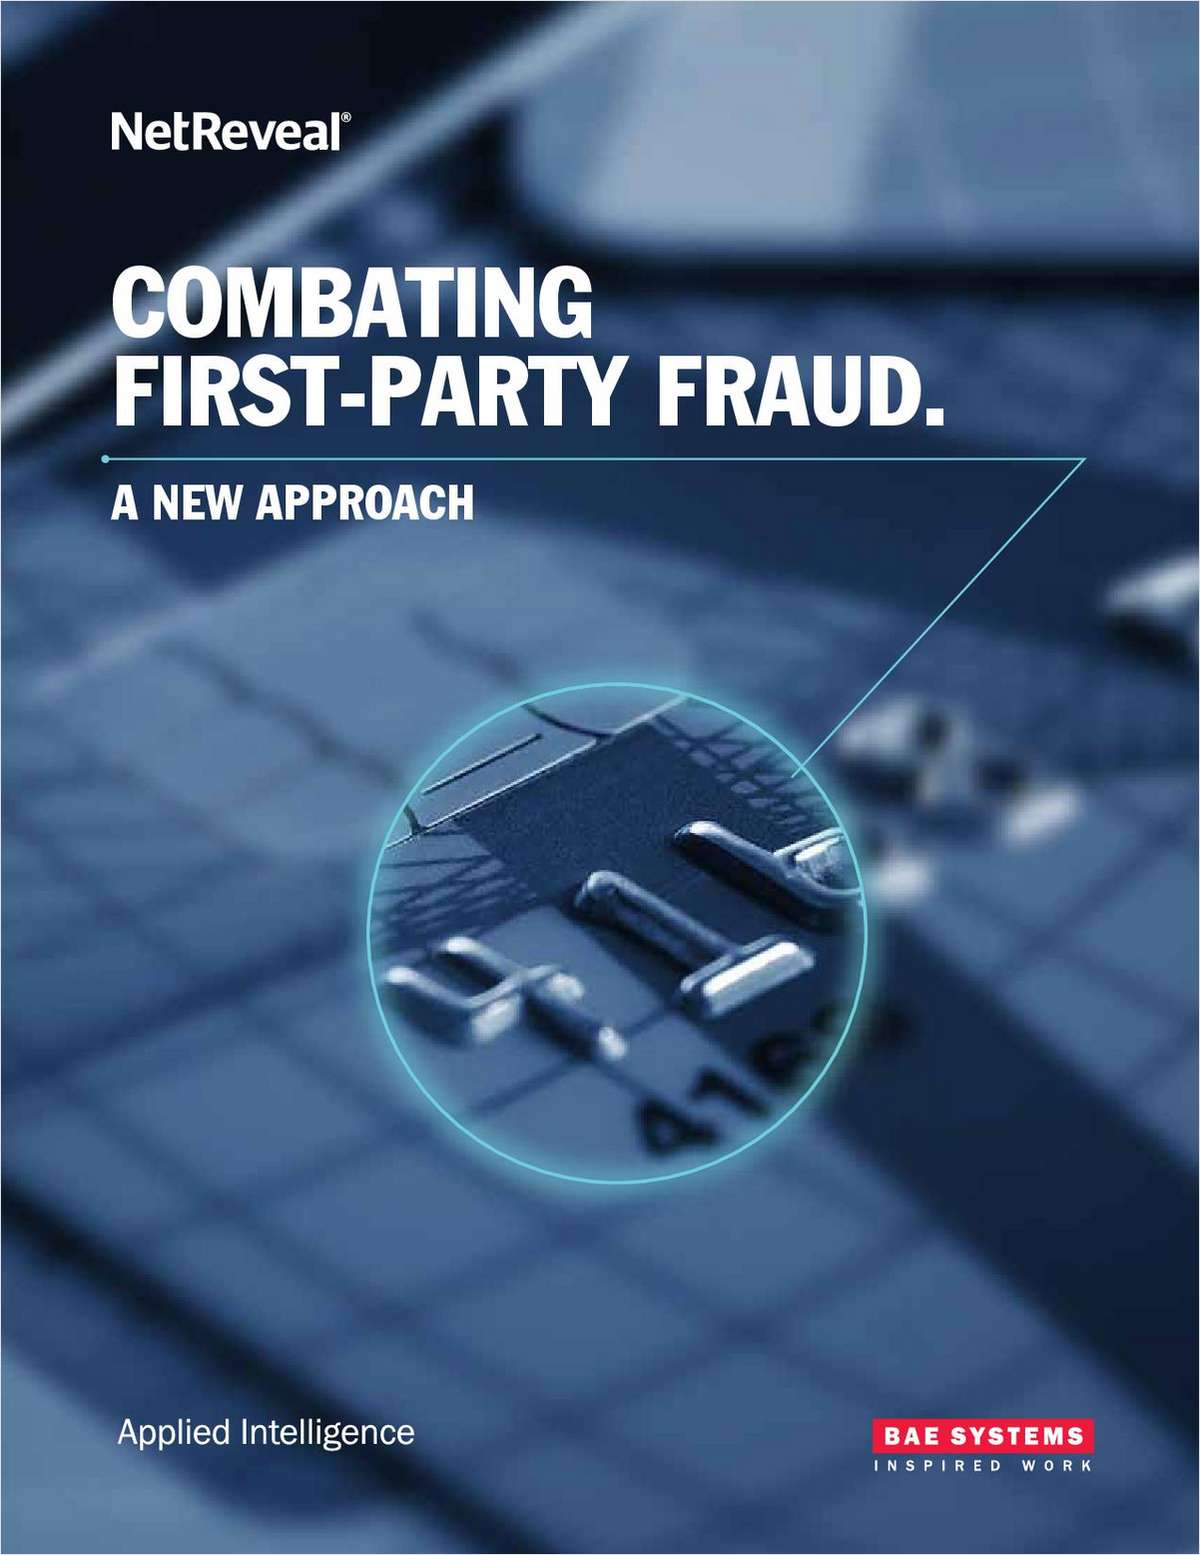 Combating First-Party Fraud - A New Approach